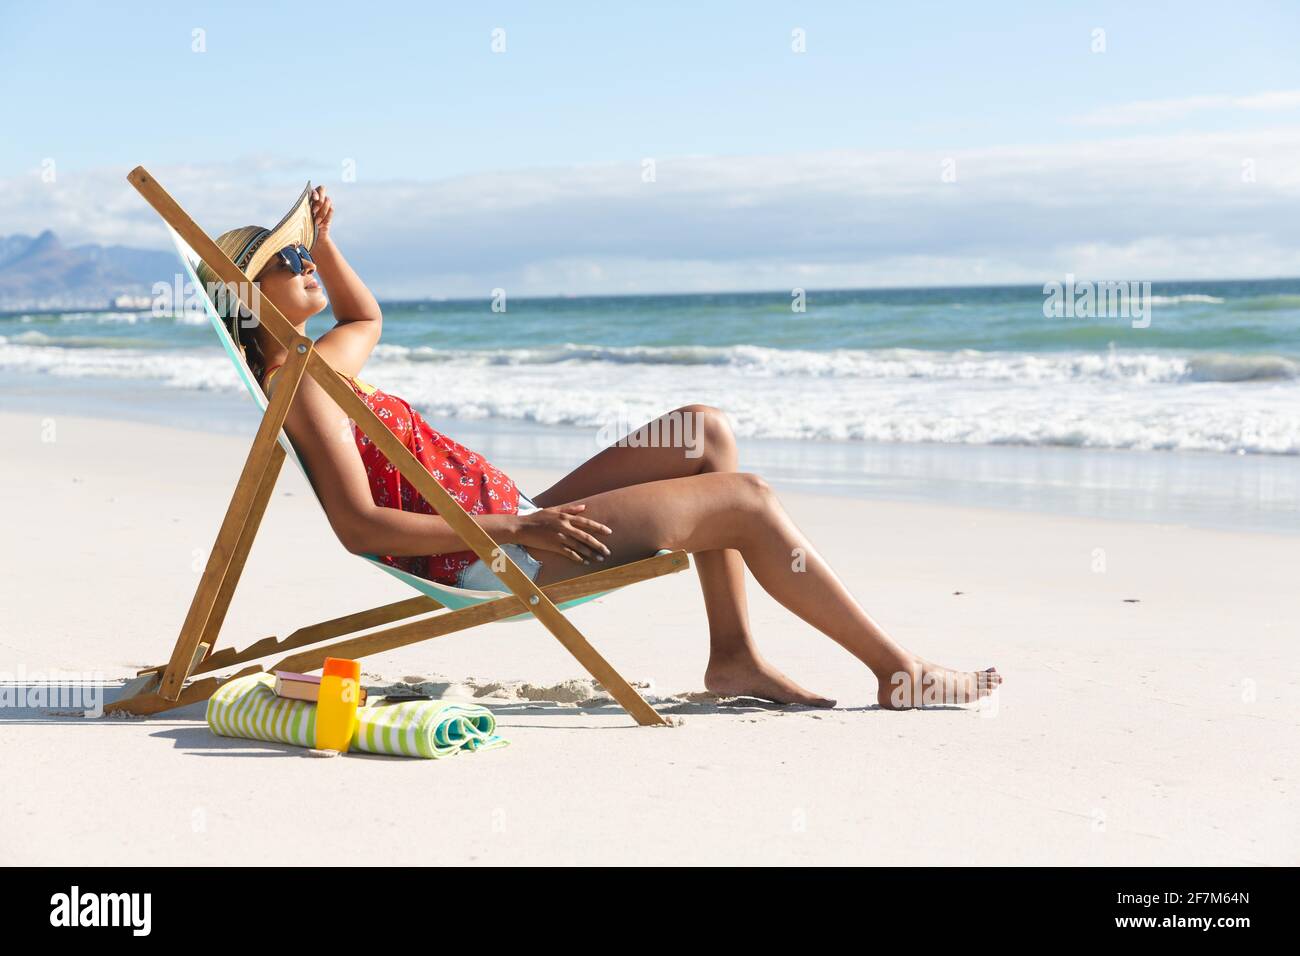 Mixed race woman on beach holiday sitting in deckchair sunbathing Stock Photo